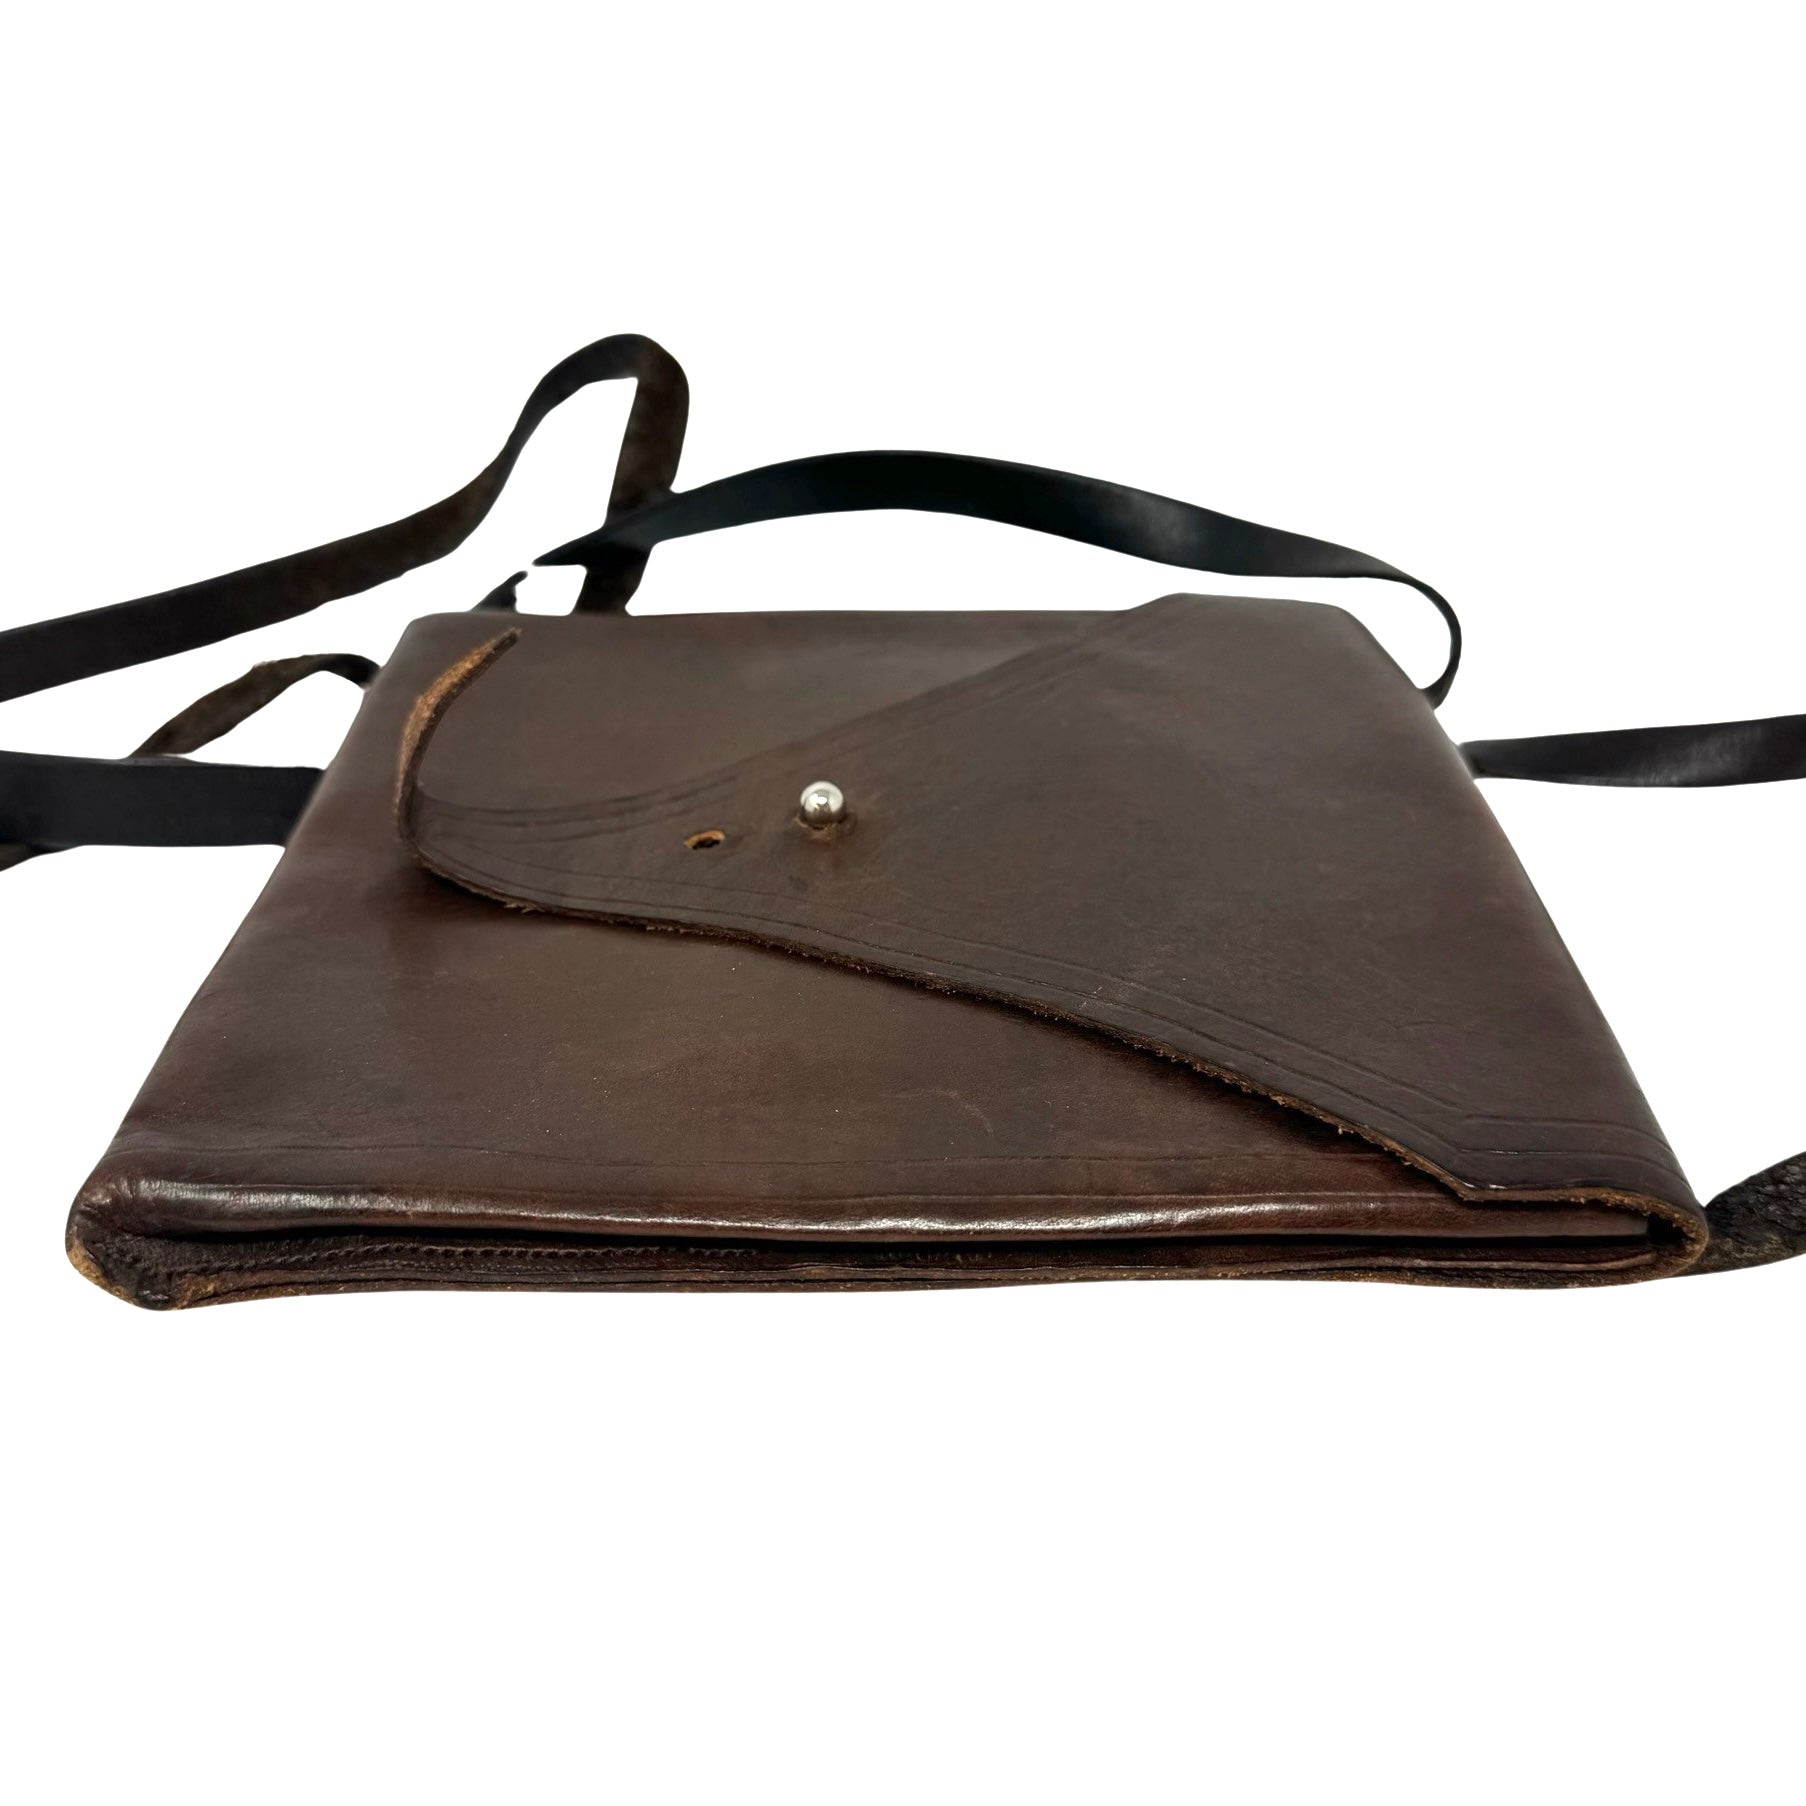 Vintage Leather Square Pouch Crossbody Bag